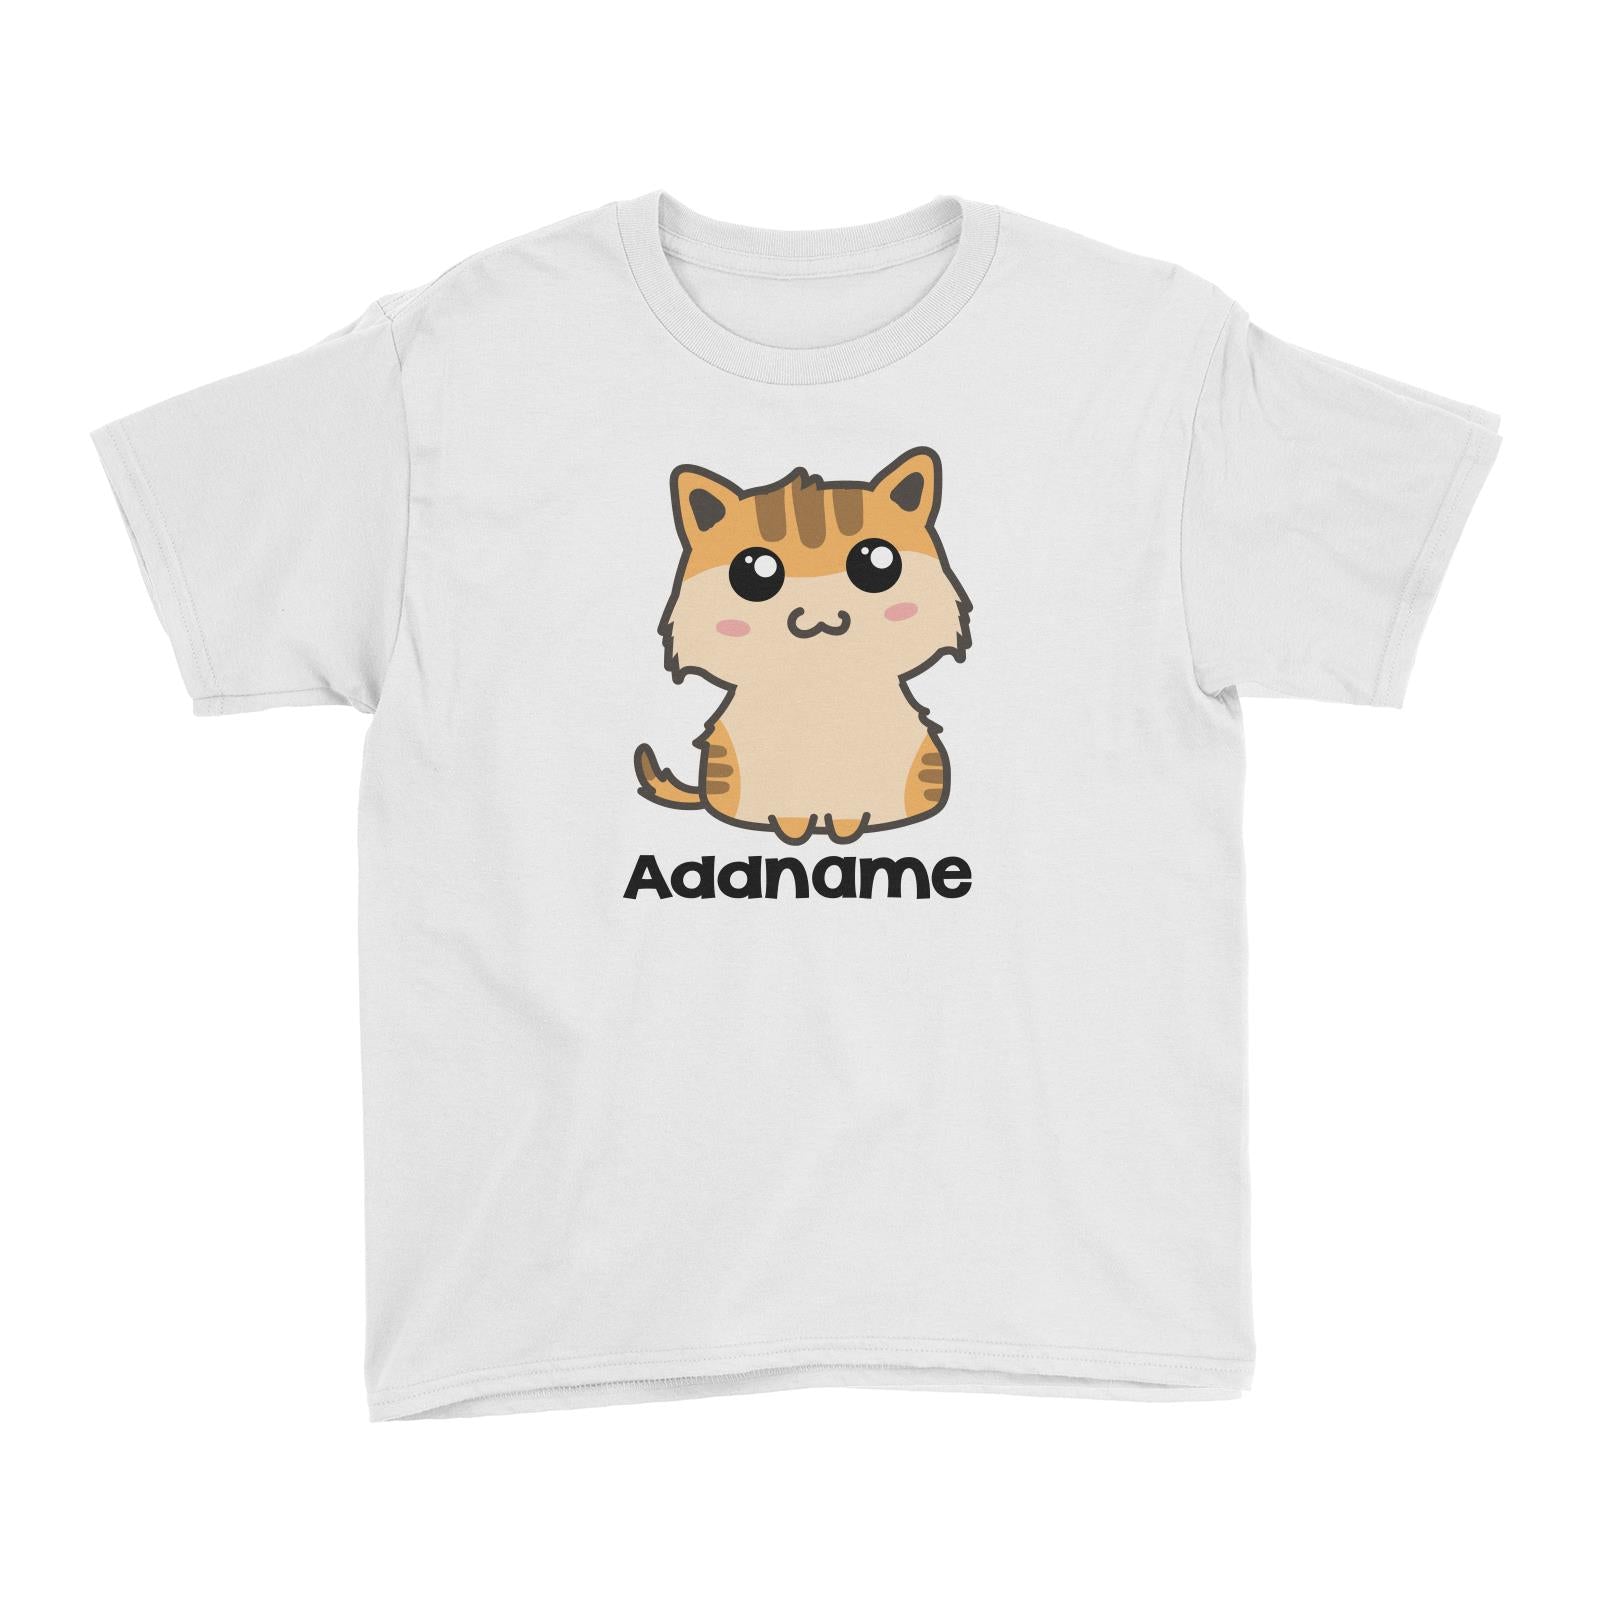 Drawn Adorable Cats Cream & Yellow Addname Kid's T-Shirt